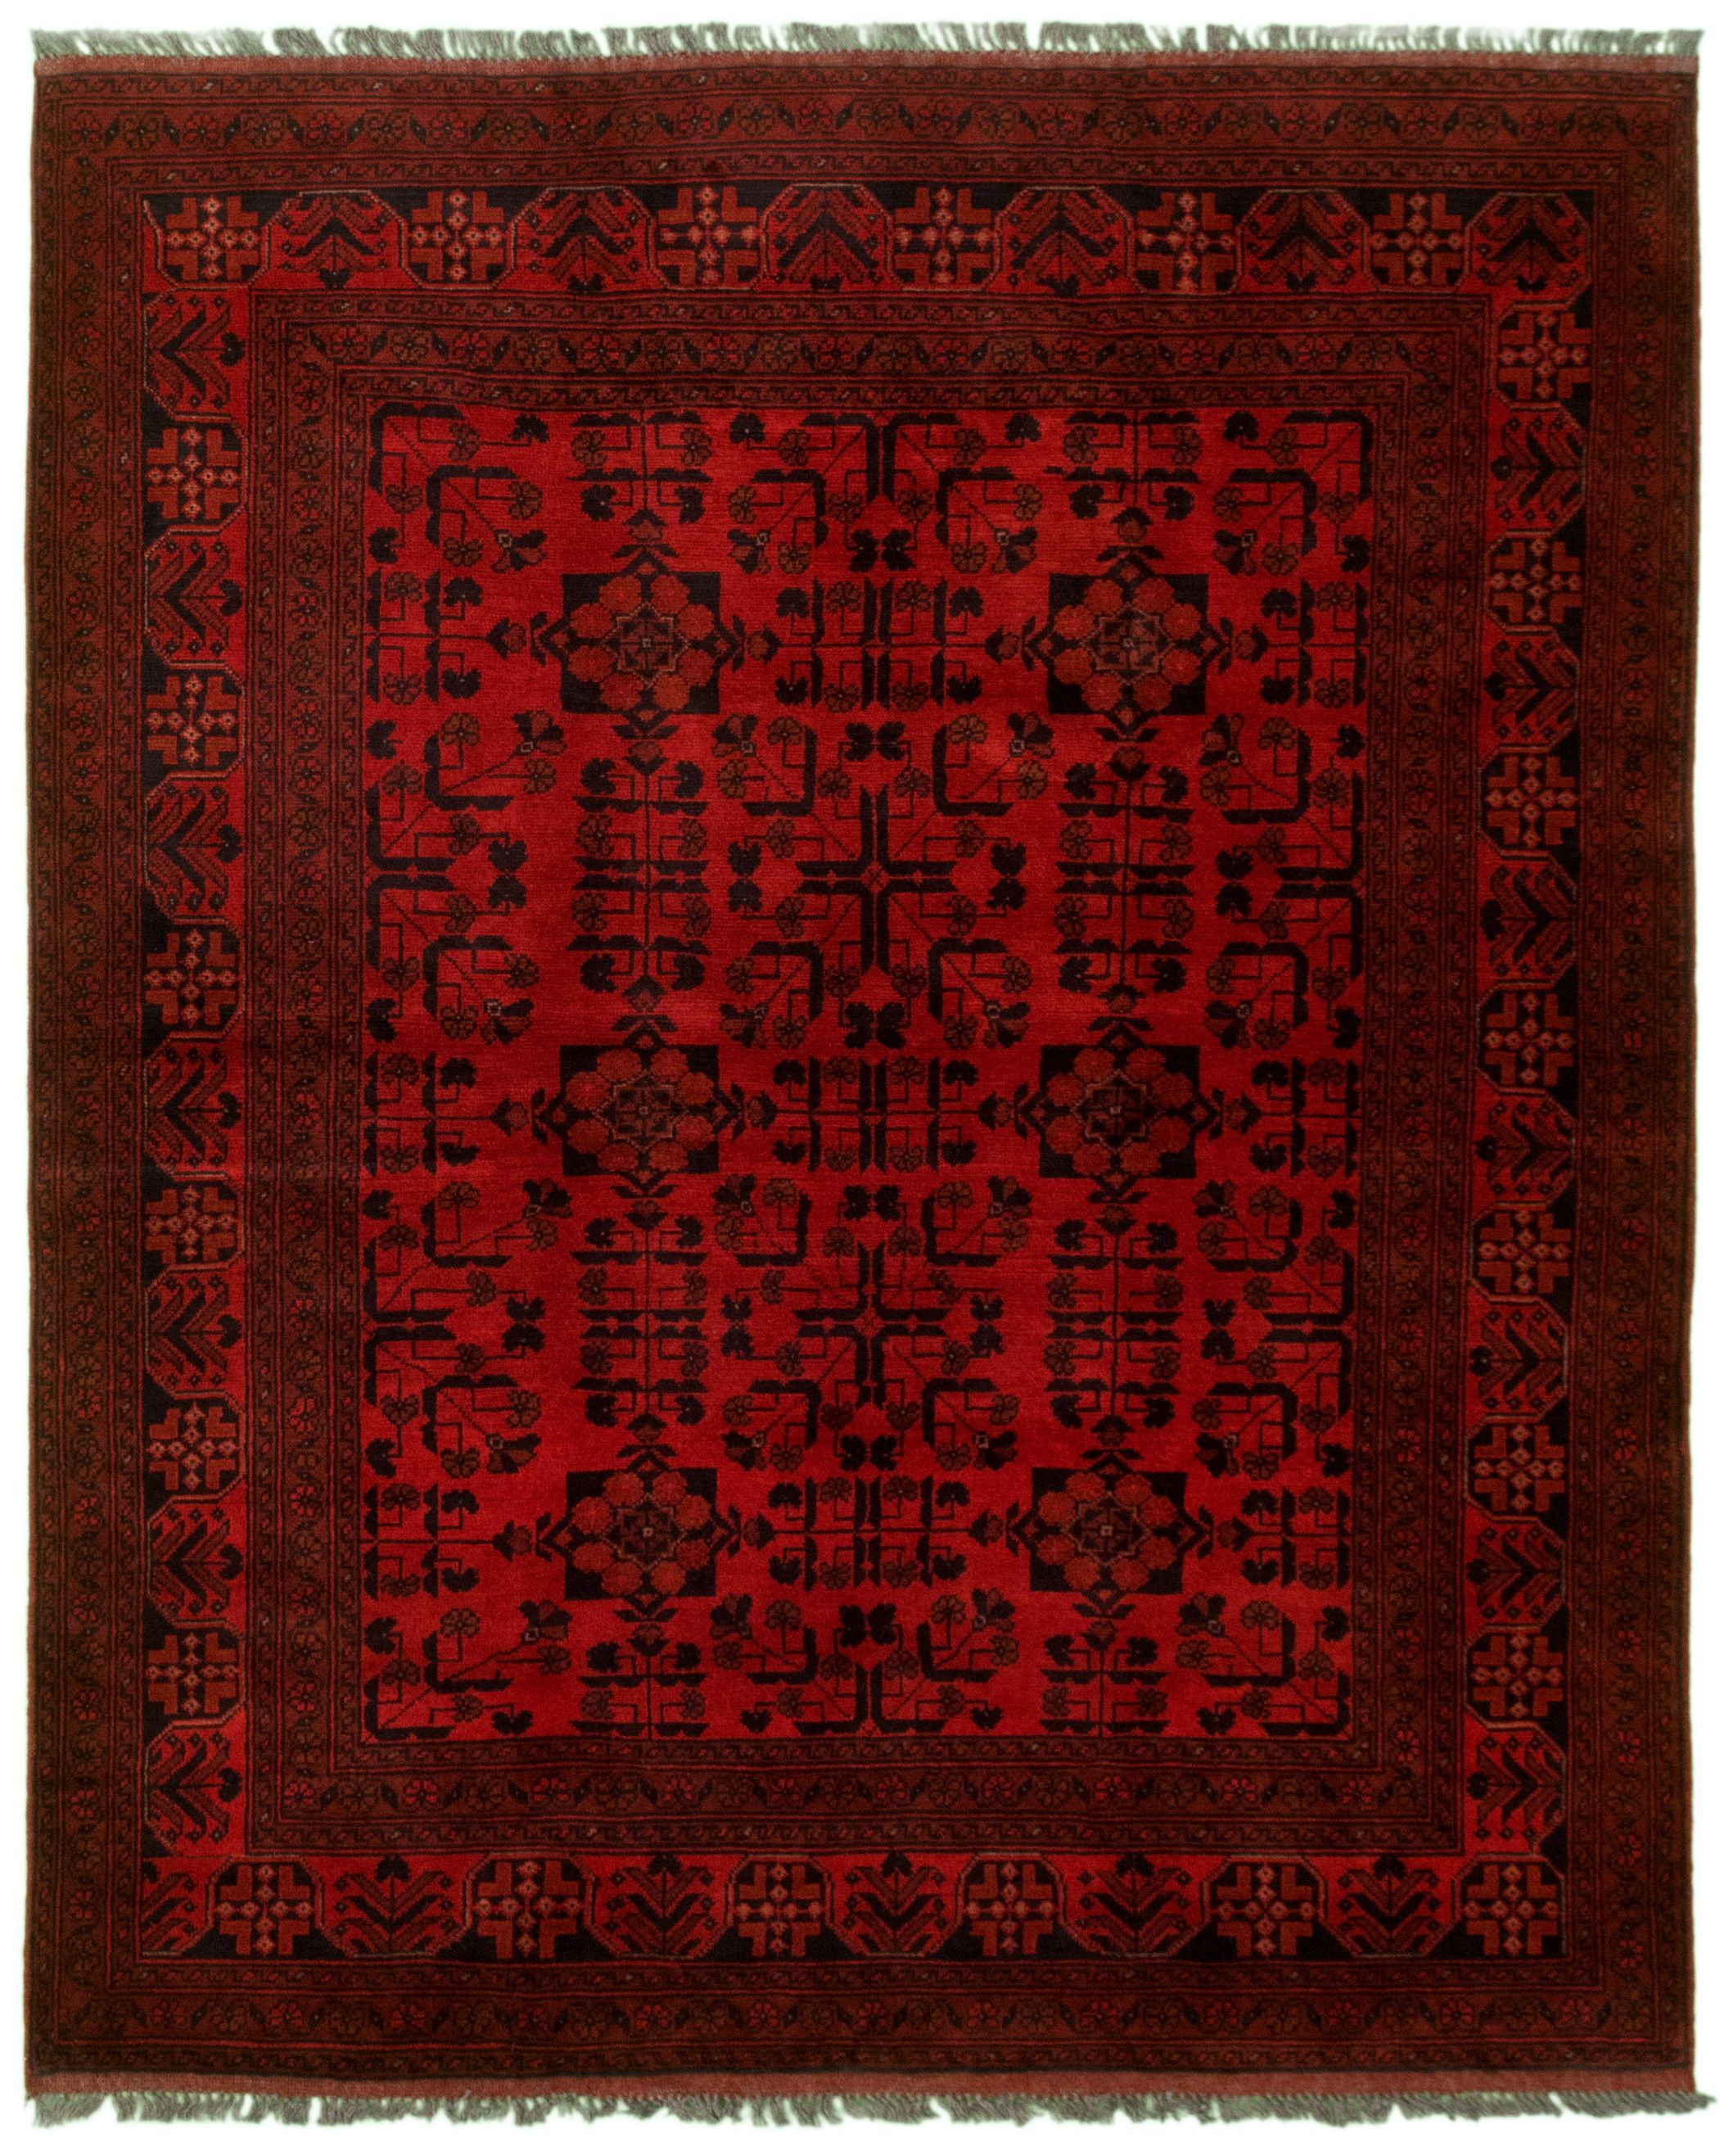 Hand-knotted Finest Khal Mohammadi Red Wool Rug 5'1" x 6'4"  Size: 5'1" x 6'4"  